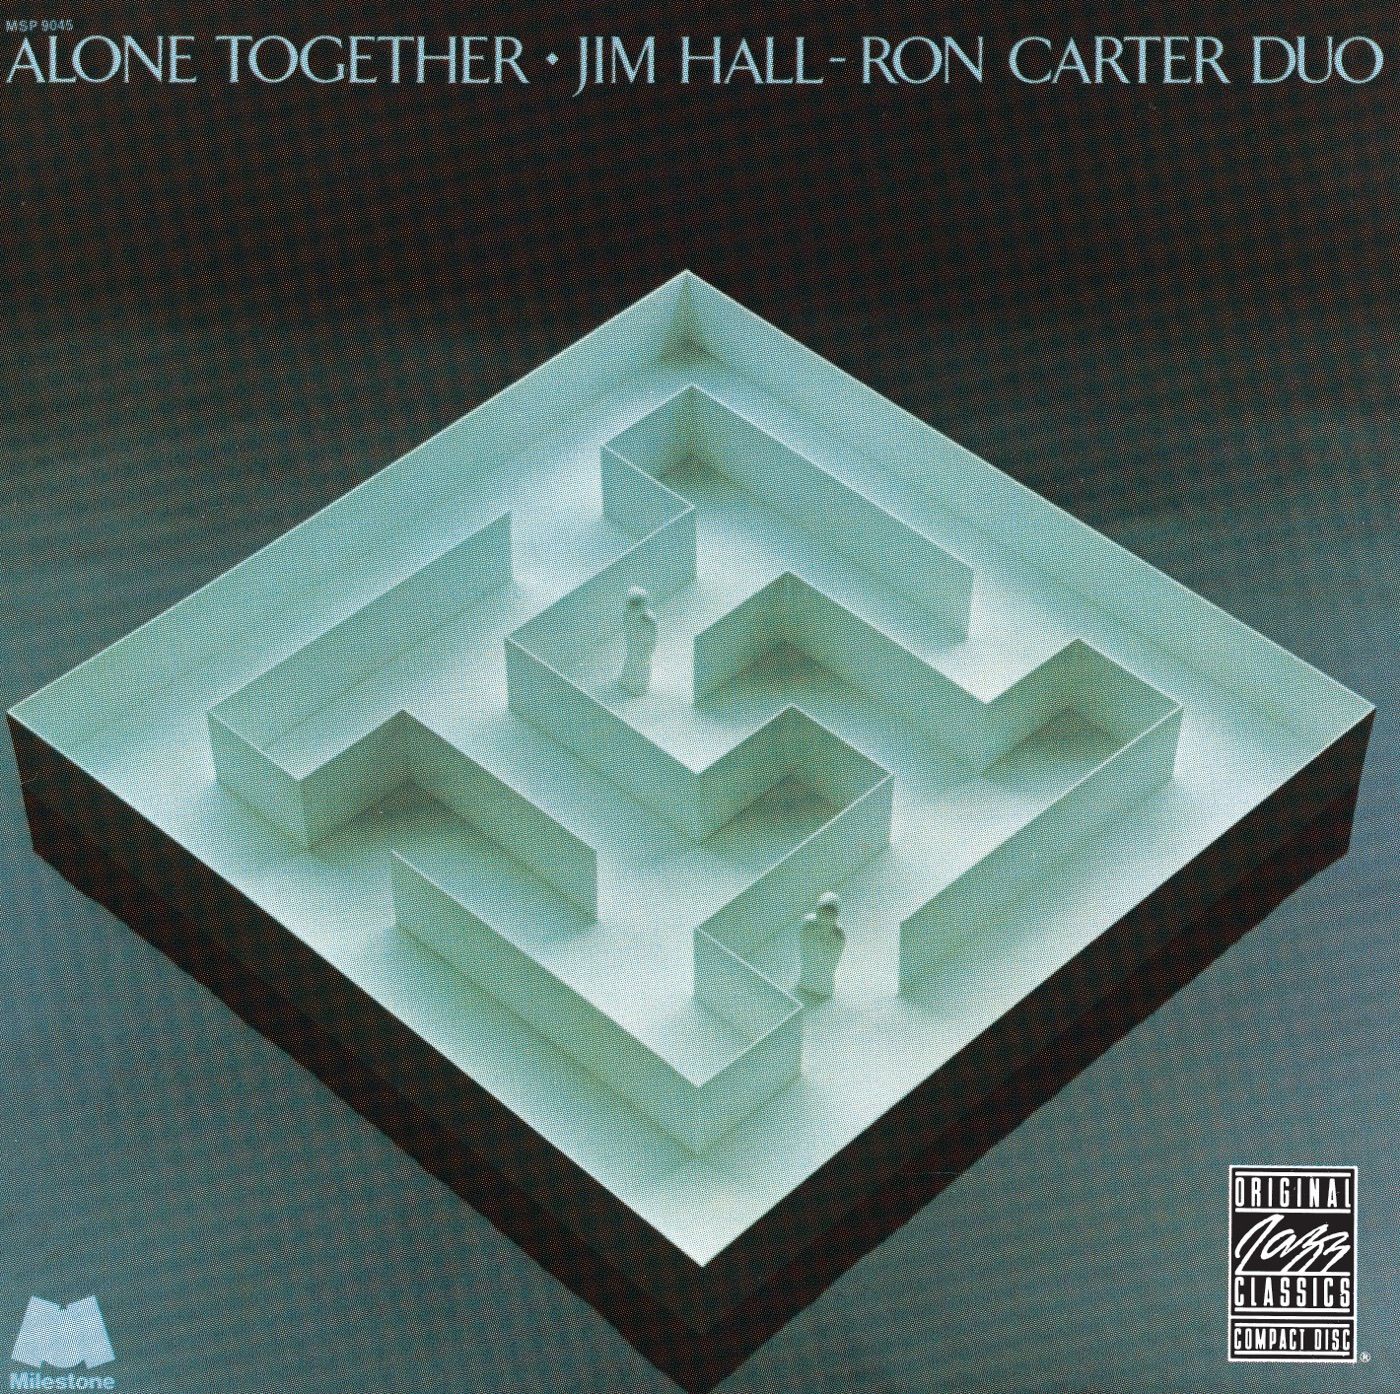 Alone Together by Jim Hall, Ron Carter